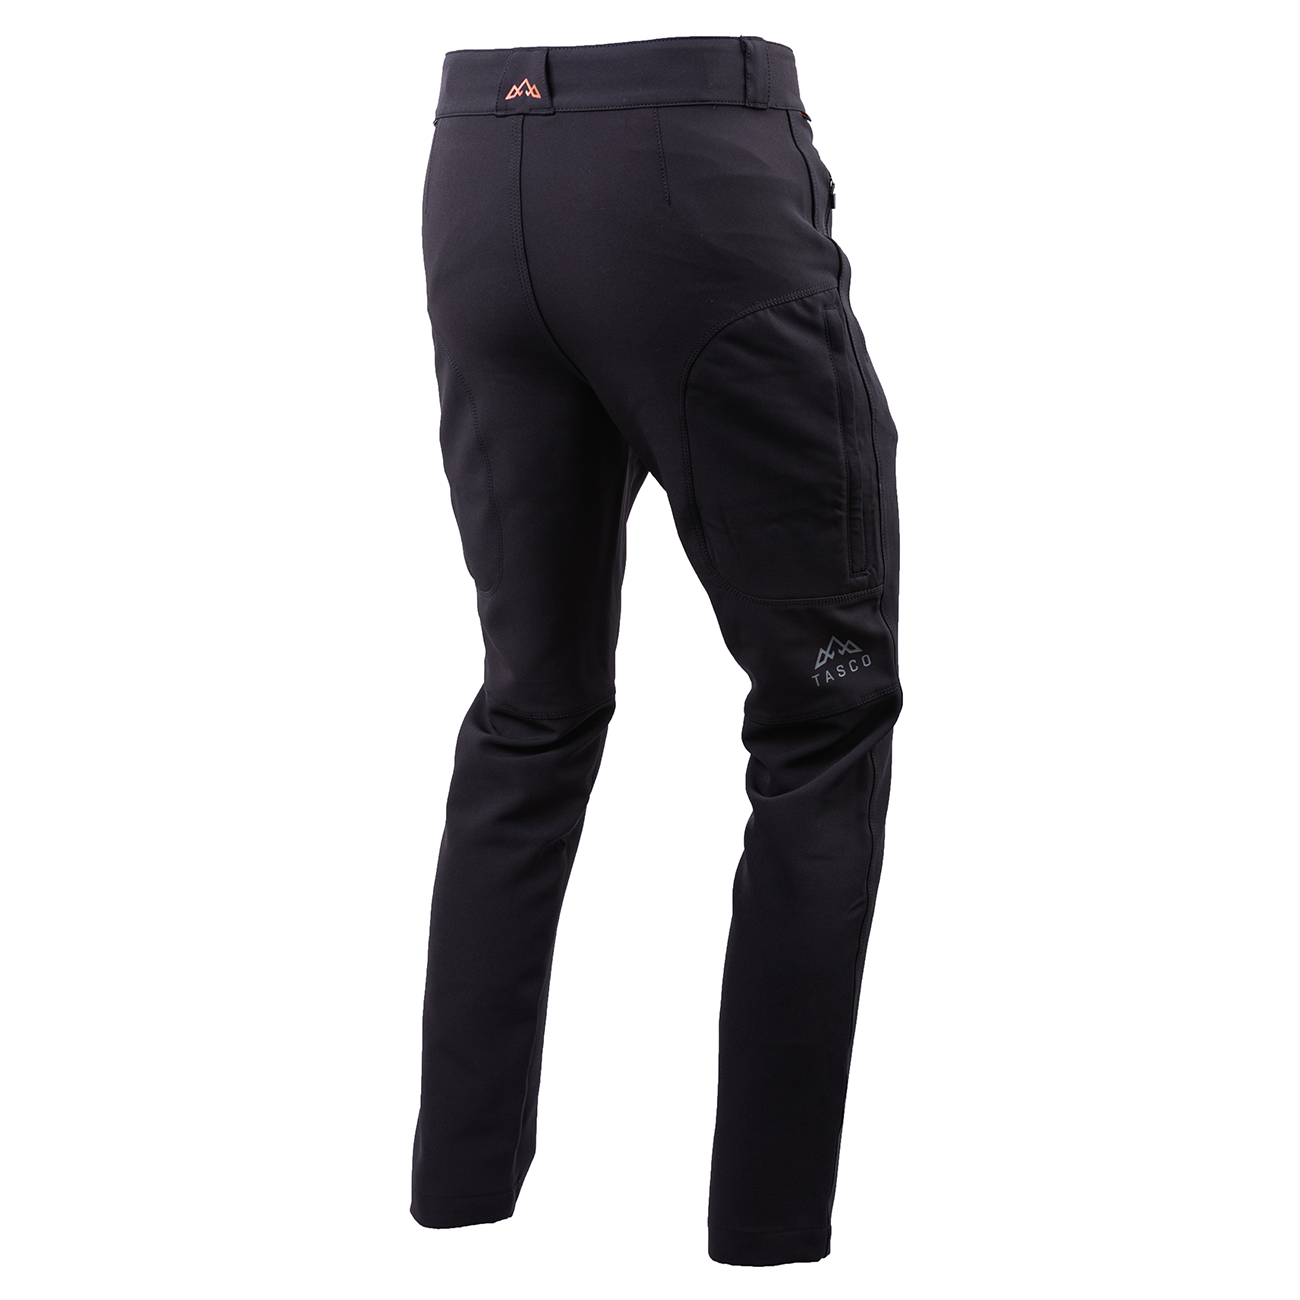 TASCO Mountain Bike Scout II Ride Pant Black from the Back